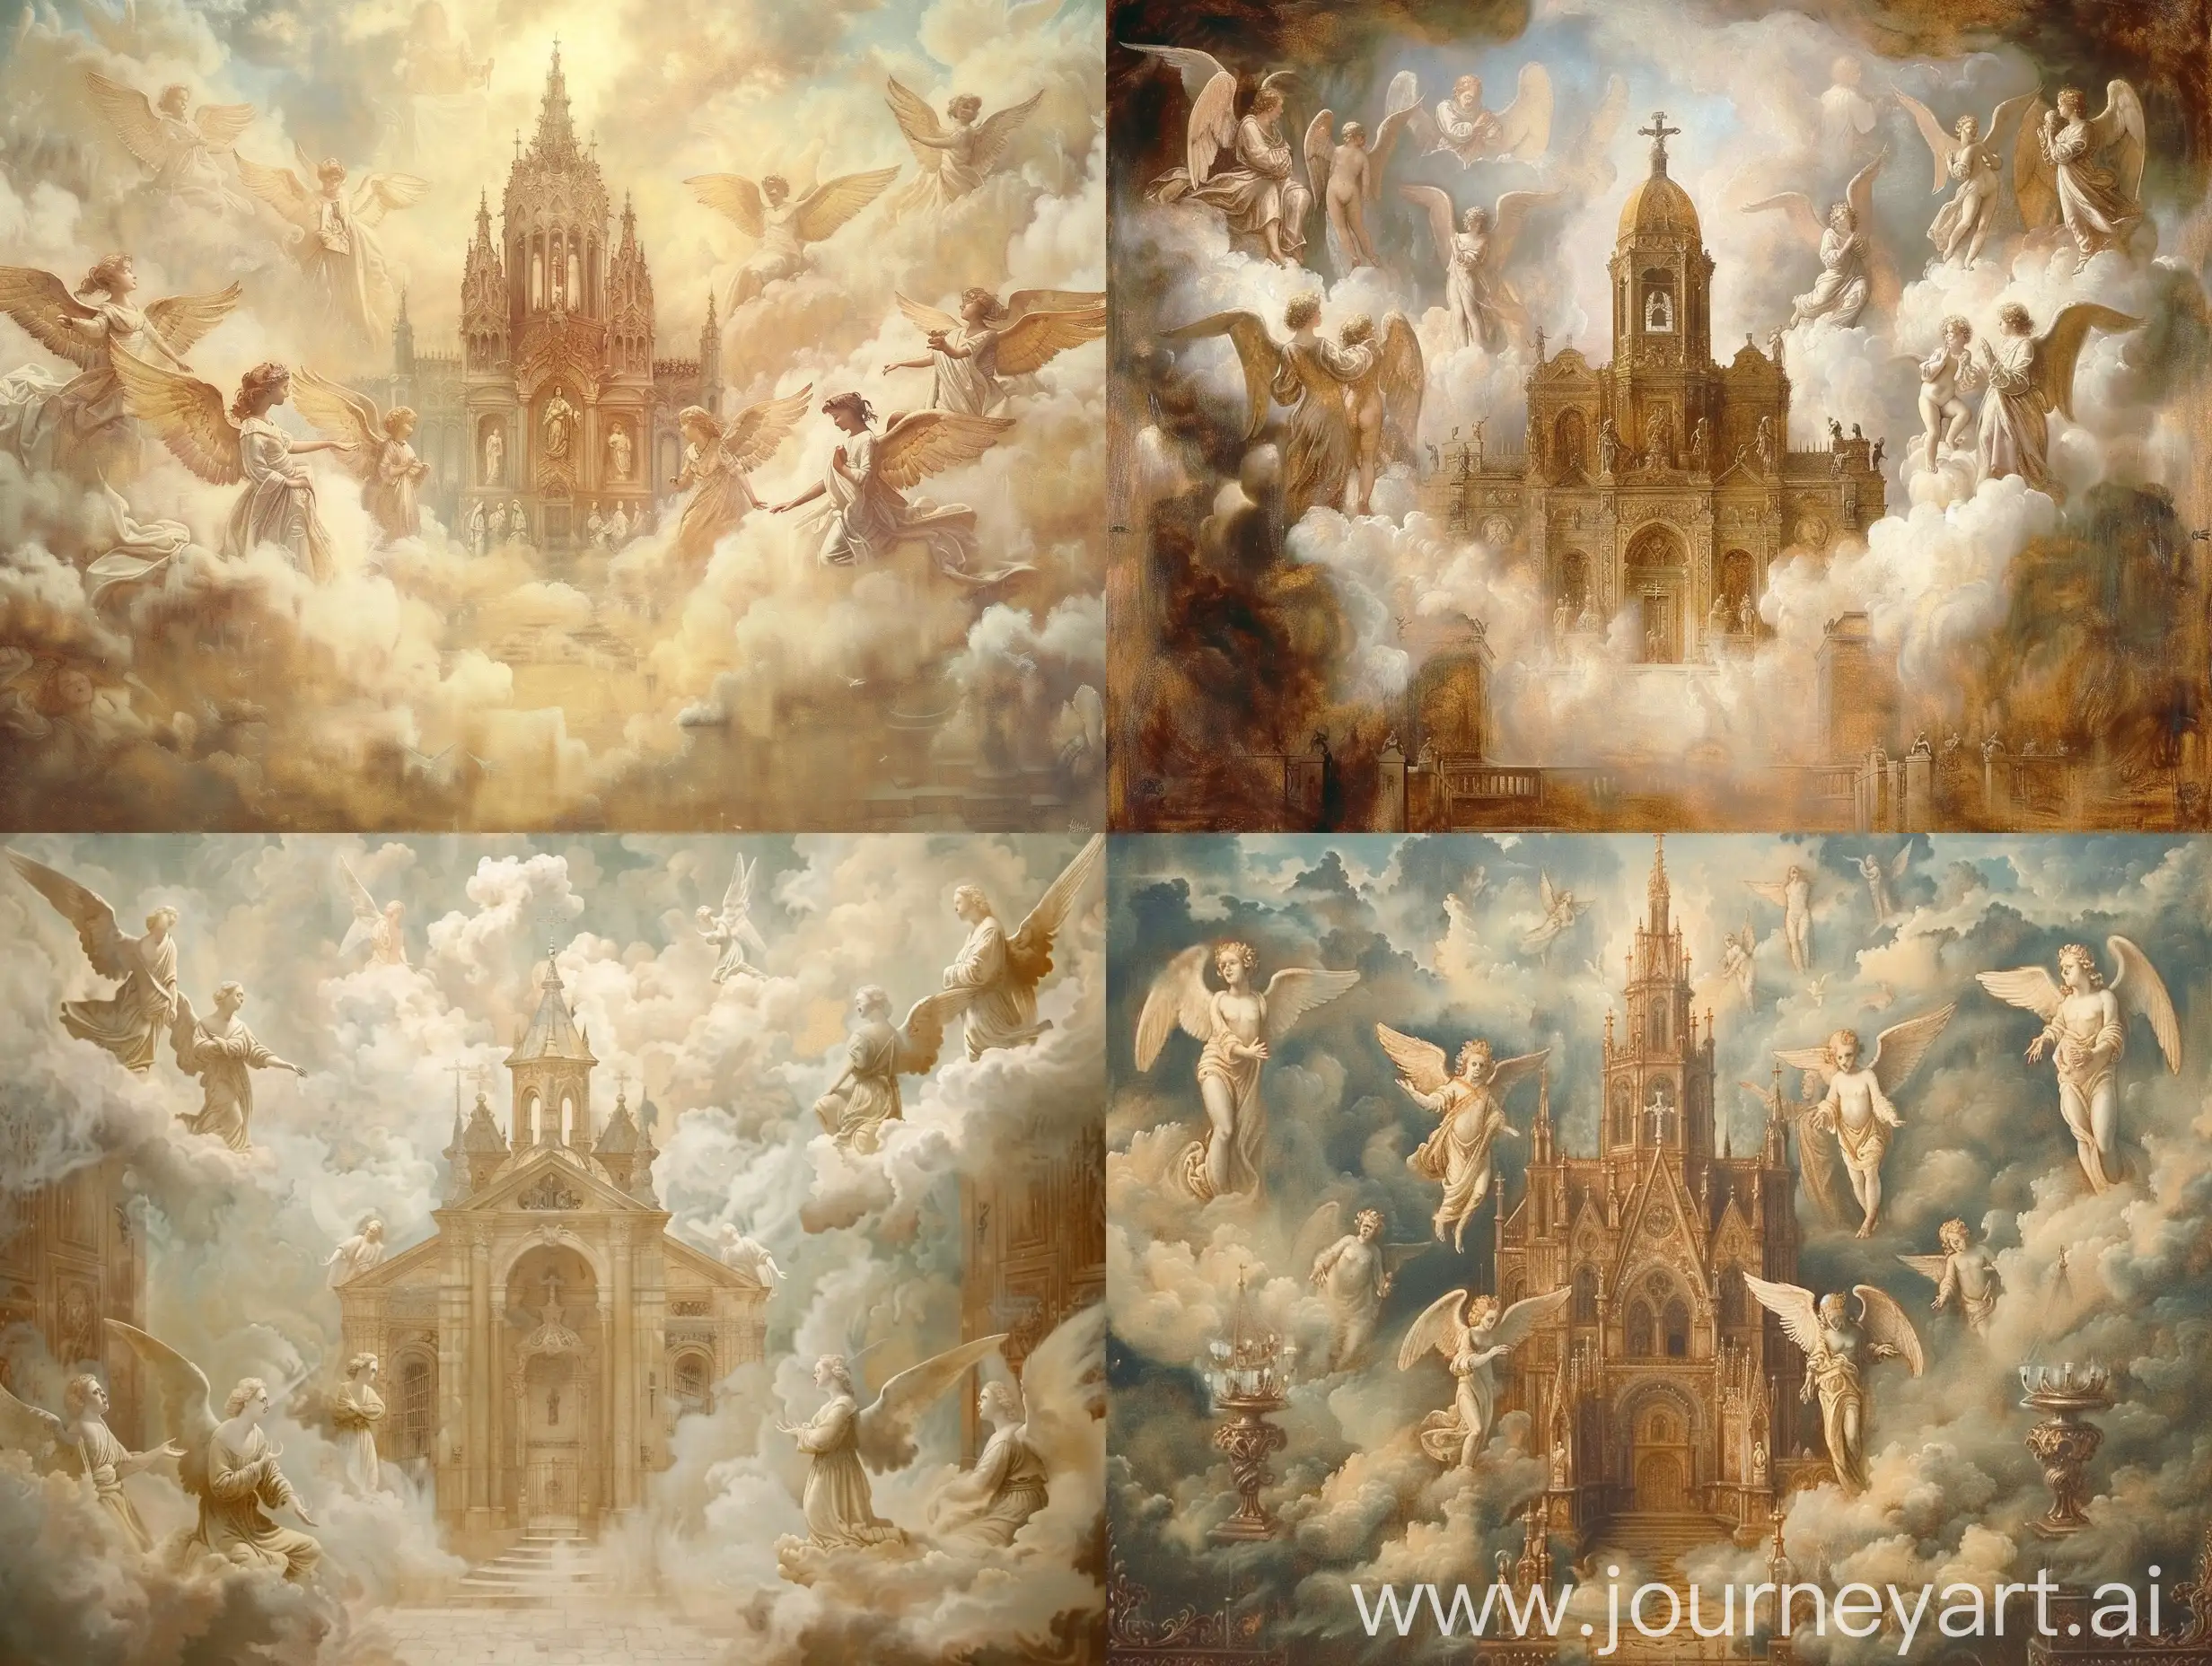 Renaissance-Church-Amidst-Angelic-Sculptures-and-Ethereal-Mists